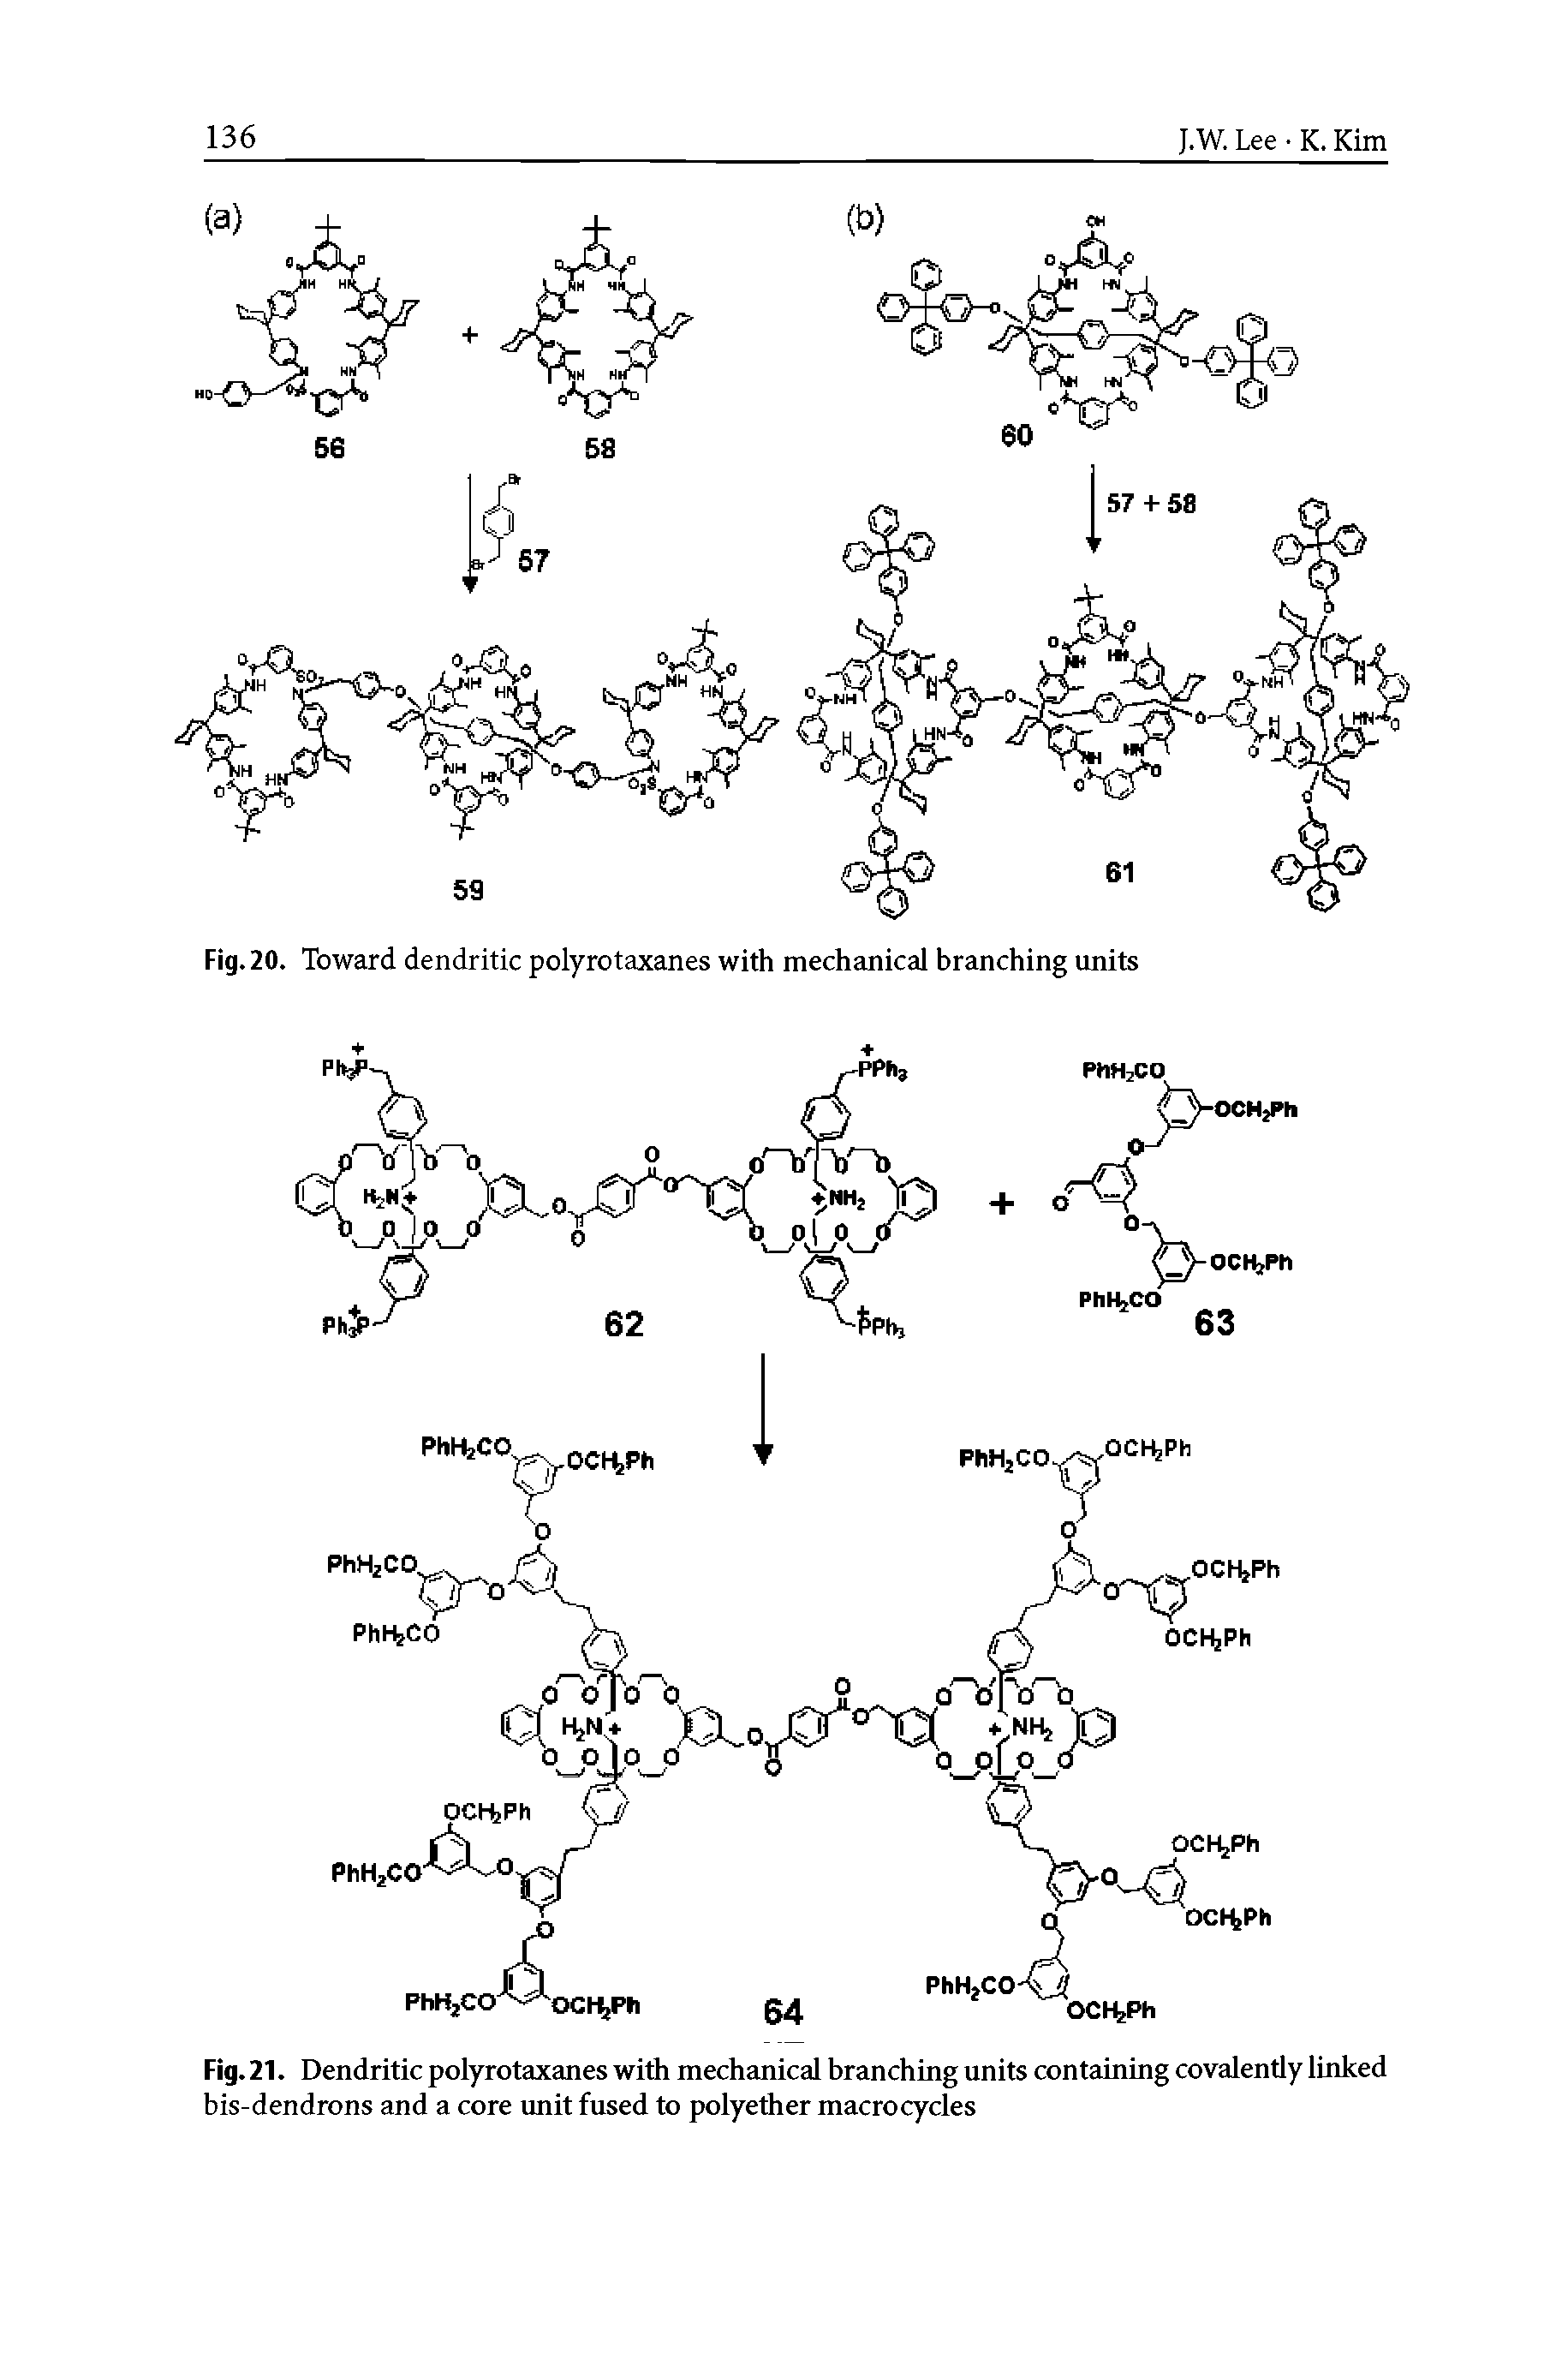 Fig. 21. Dendritic polyrotaxanes with mechanical branching units containing covalently linked bis-dendrons and a core imit fused to polyether macrocycles...